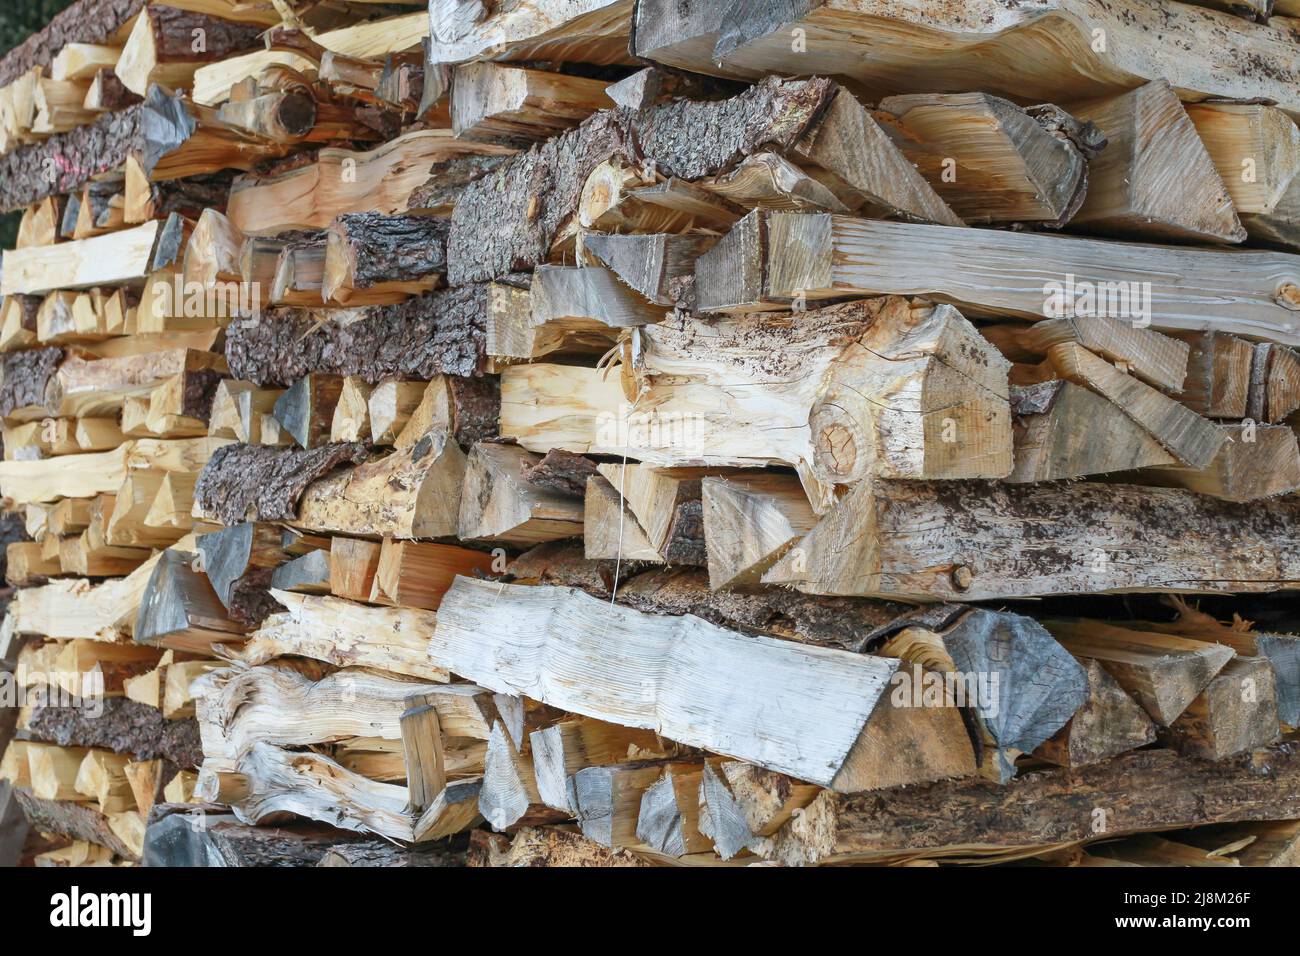 big pile with pieces of firewood Stock Photo